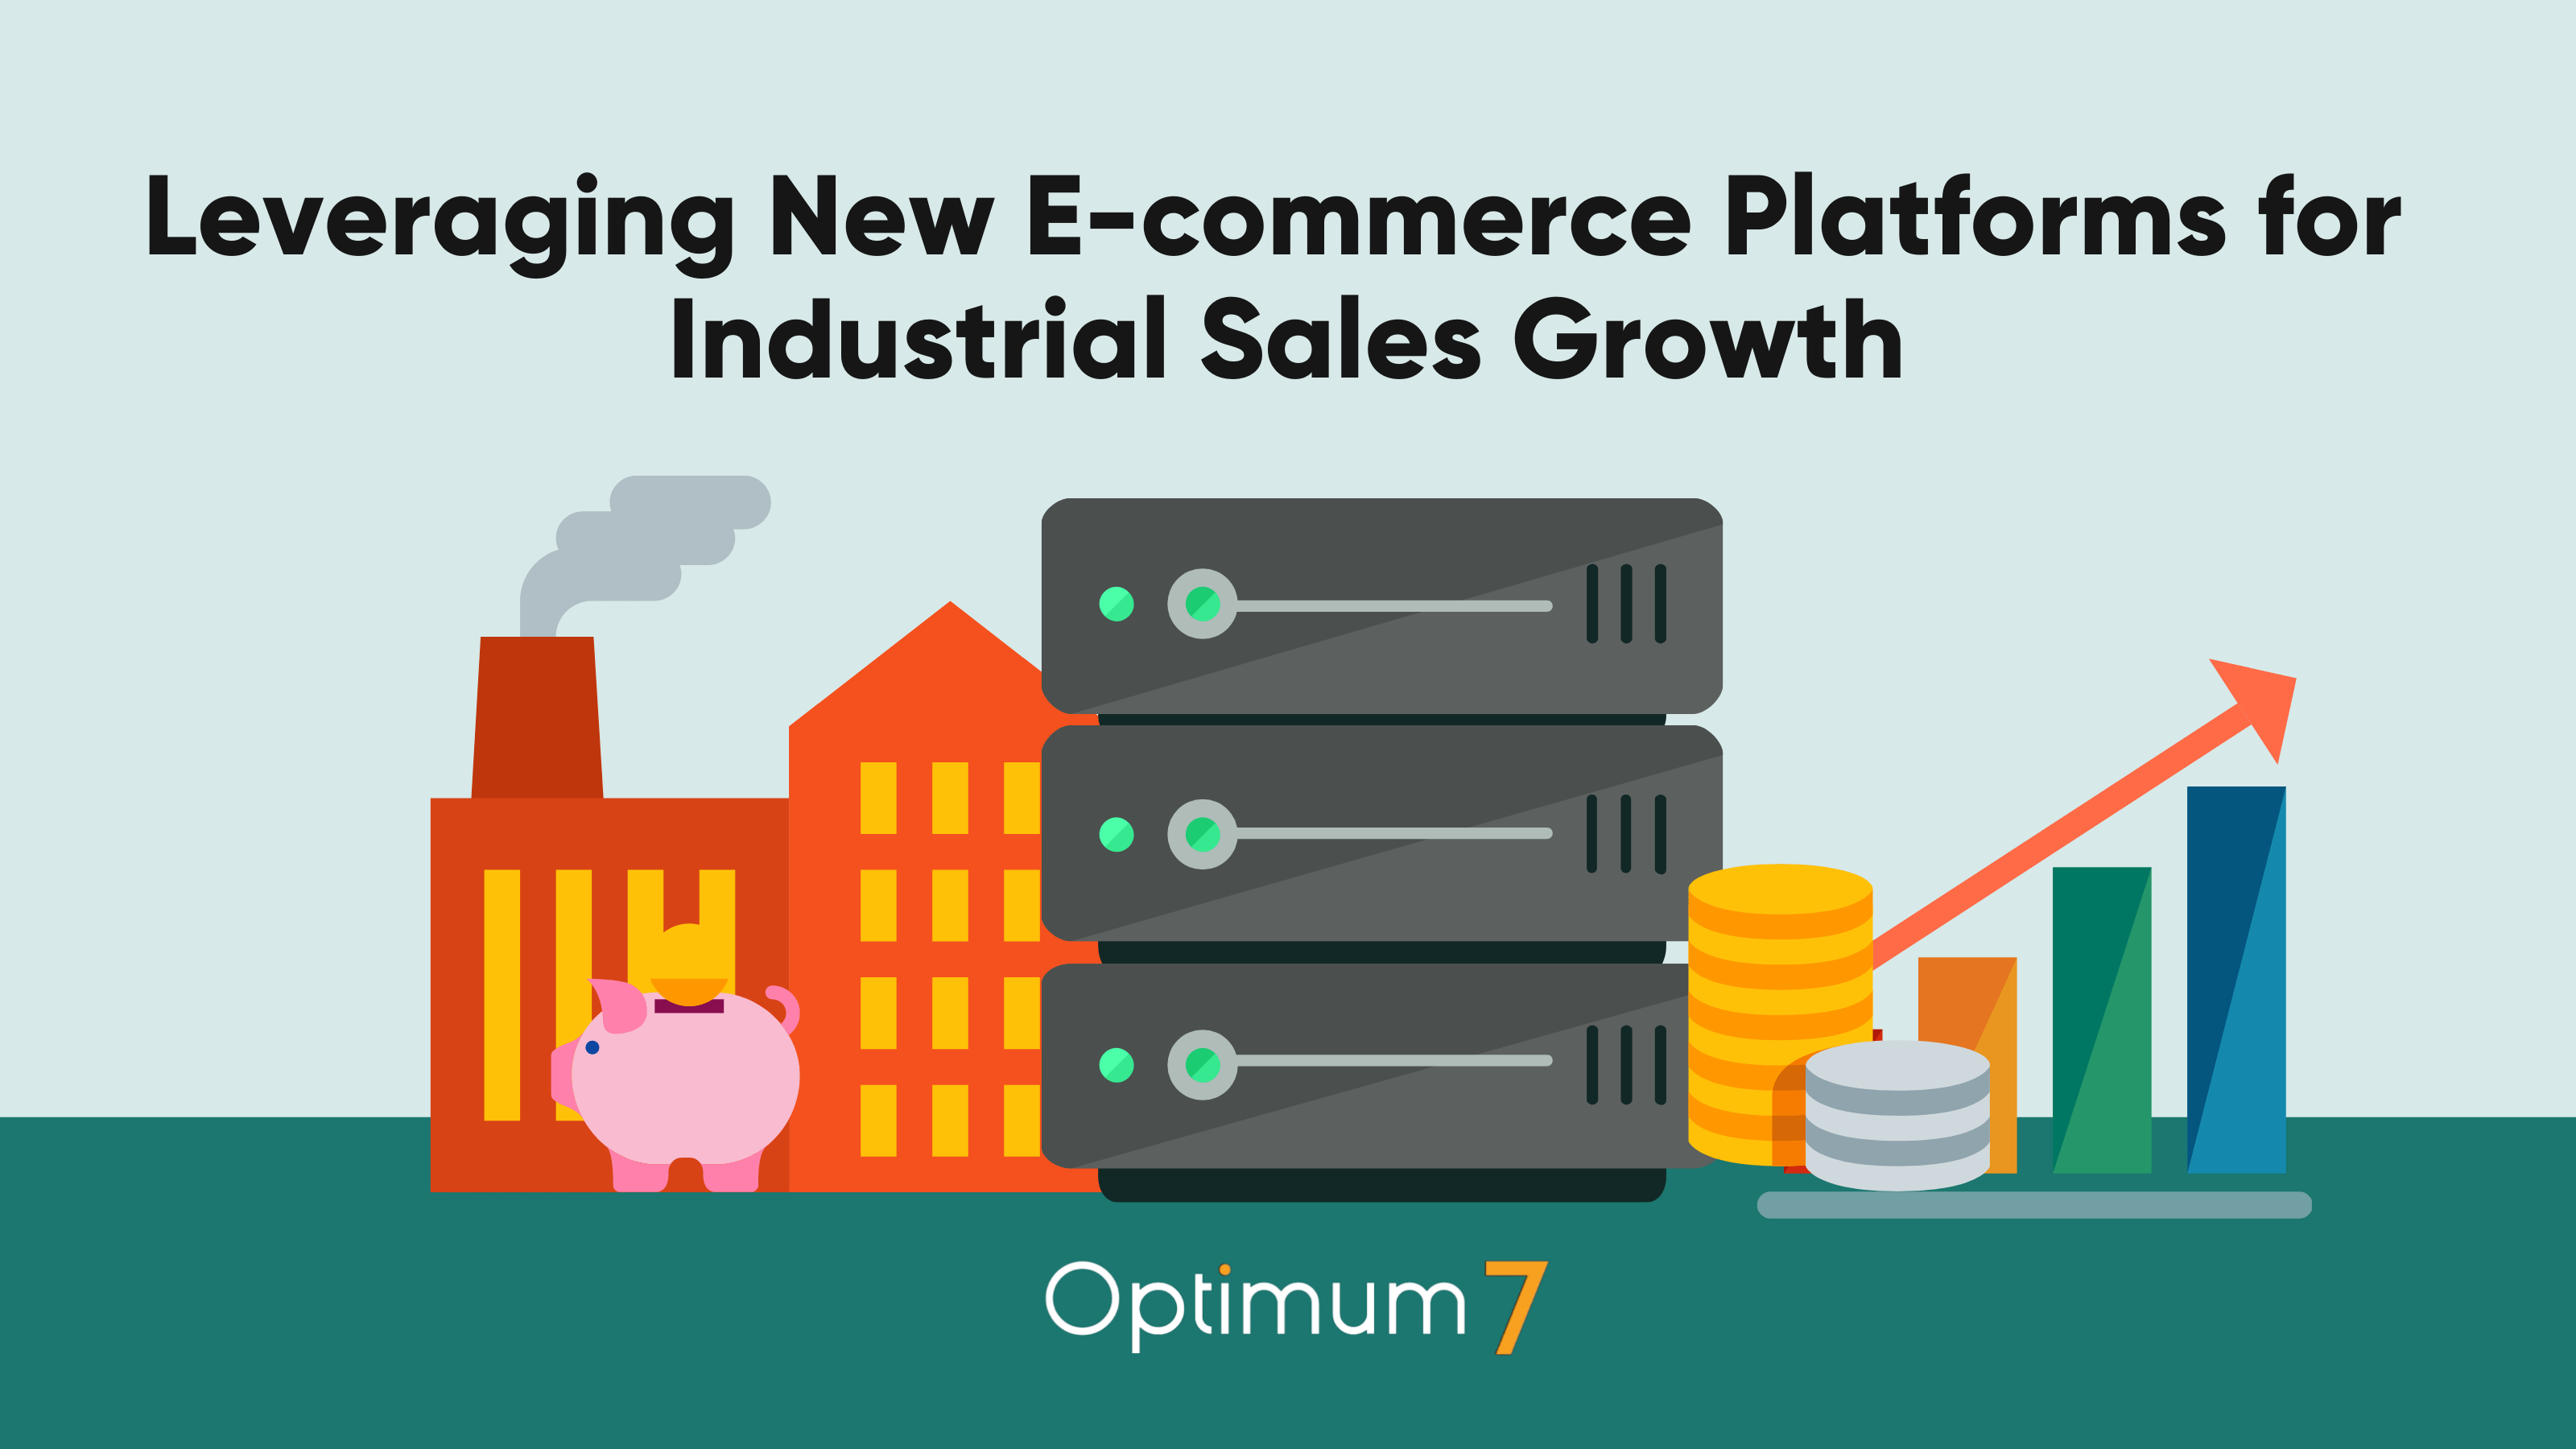 Leveraging New E-commerce Platforms for Industrial Sales Growth